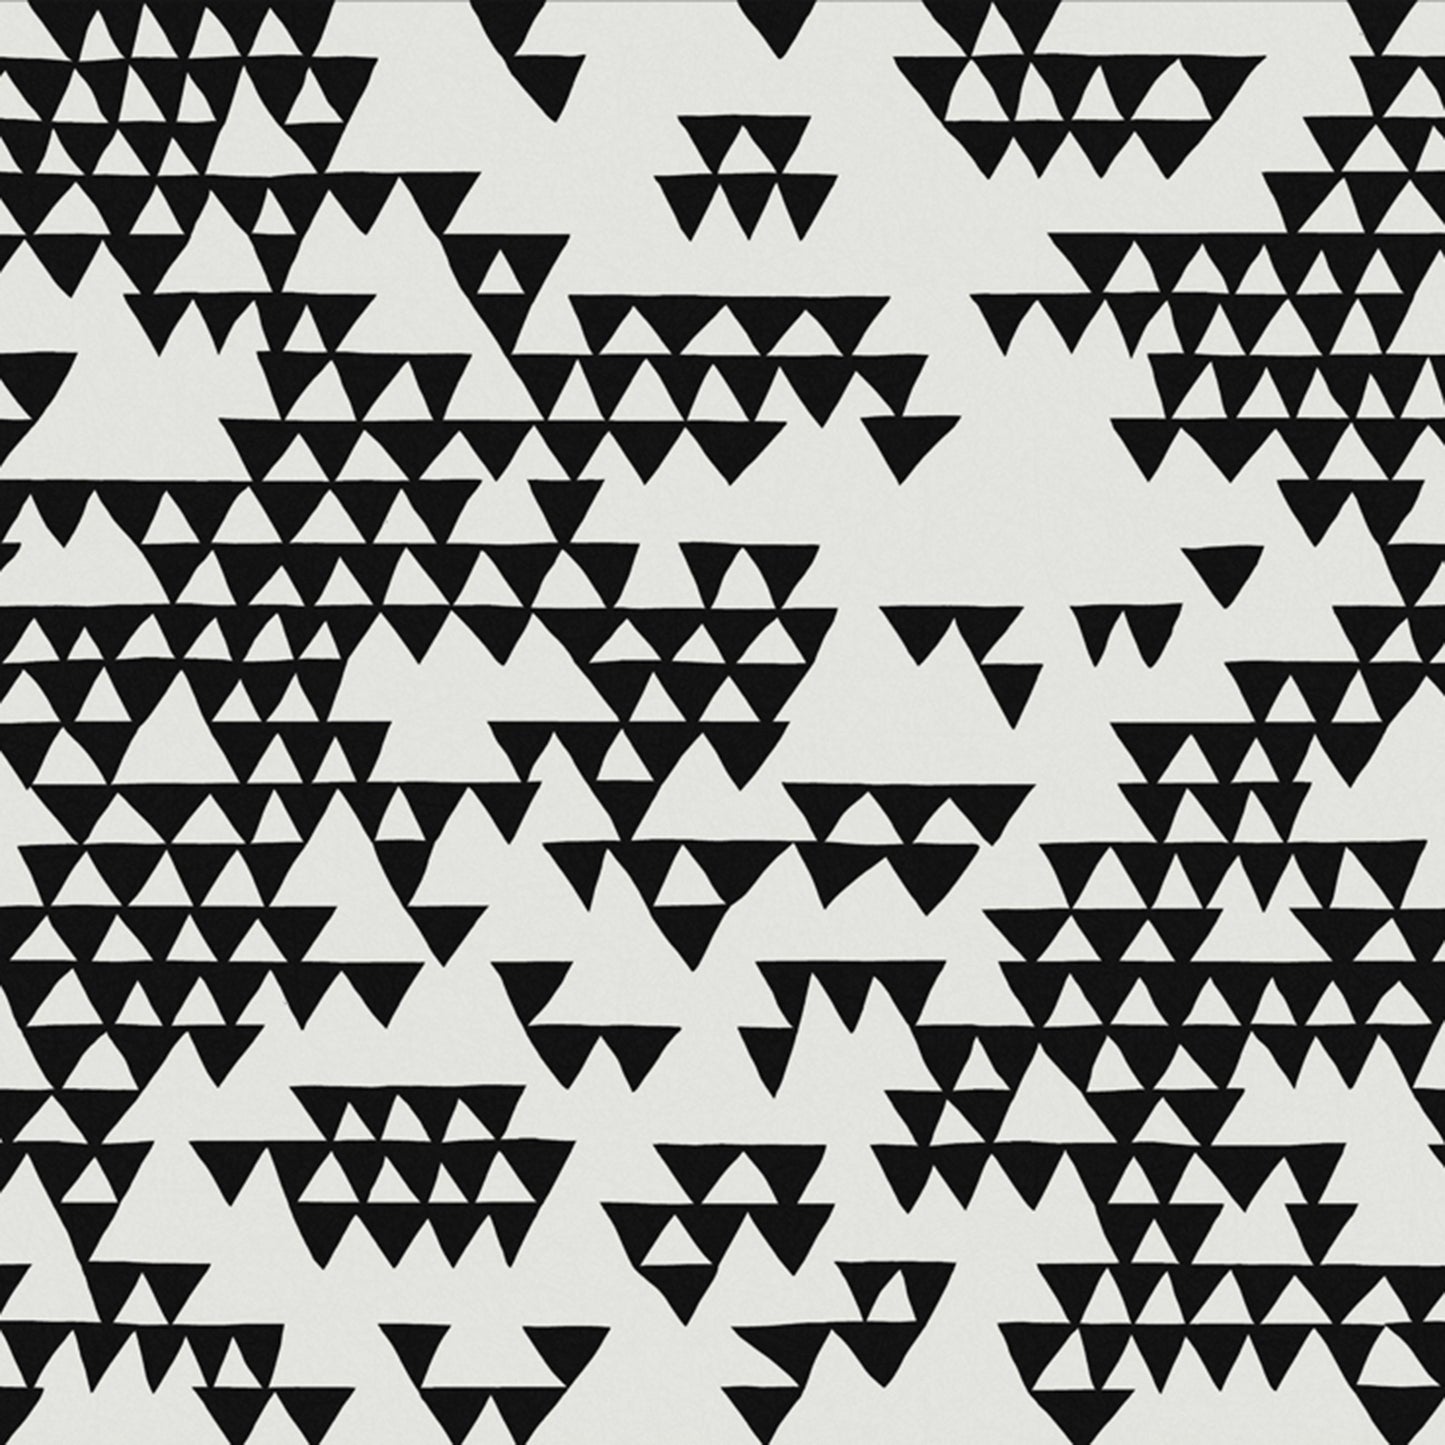 Acquire Graham & Brown Wallpaper Secret Mountain Black and White Removable Wallpaper